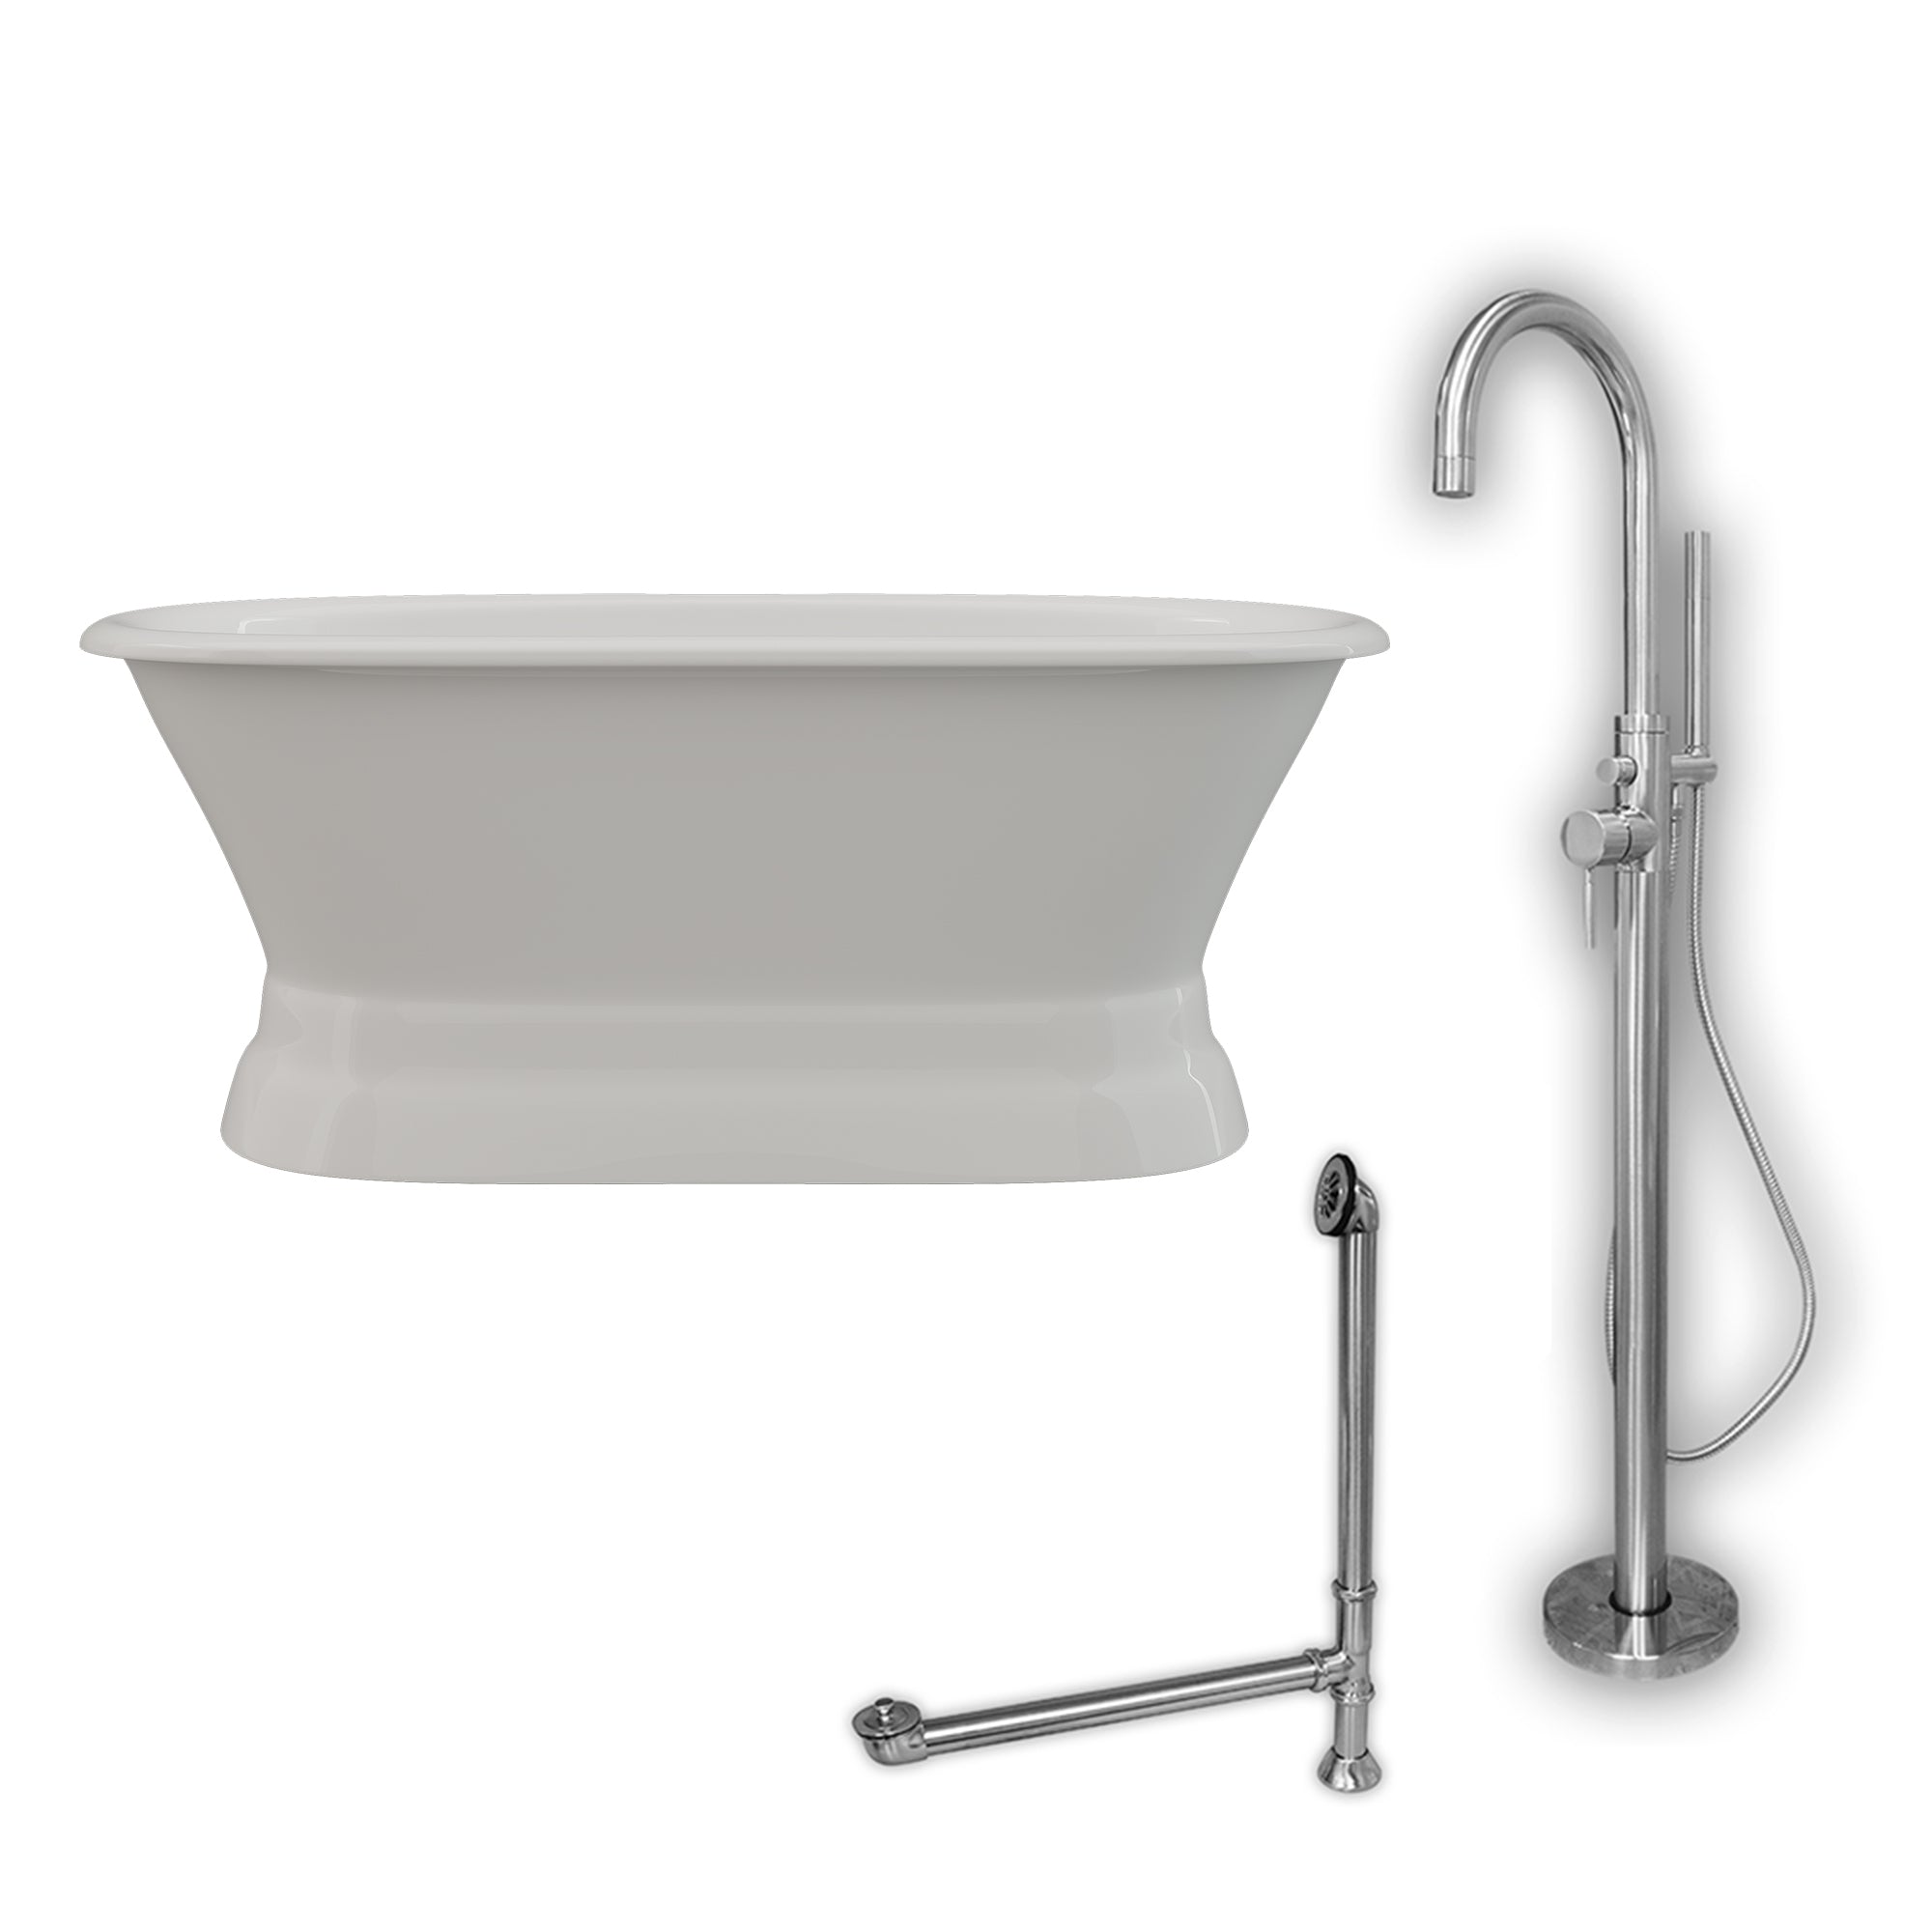 Cambridge Plumbing 60-Inch Double Ended Cast Iron Pedestal Soaking Tub (Porcelain enamel interior and white paint exterior) and Complete Plumbing Package (Brushed nickel) DE60-PED-150-PKG-NH - Vital Hydrotherapy